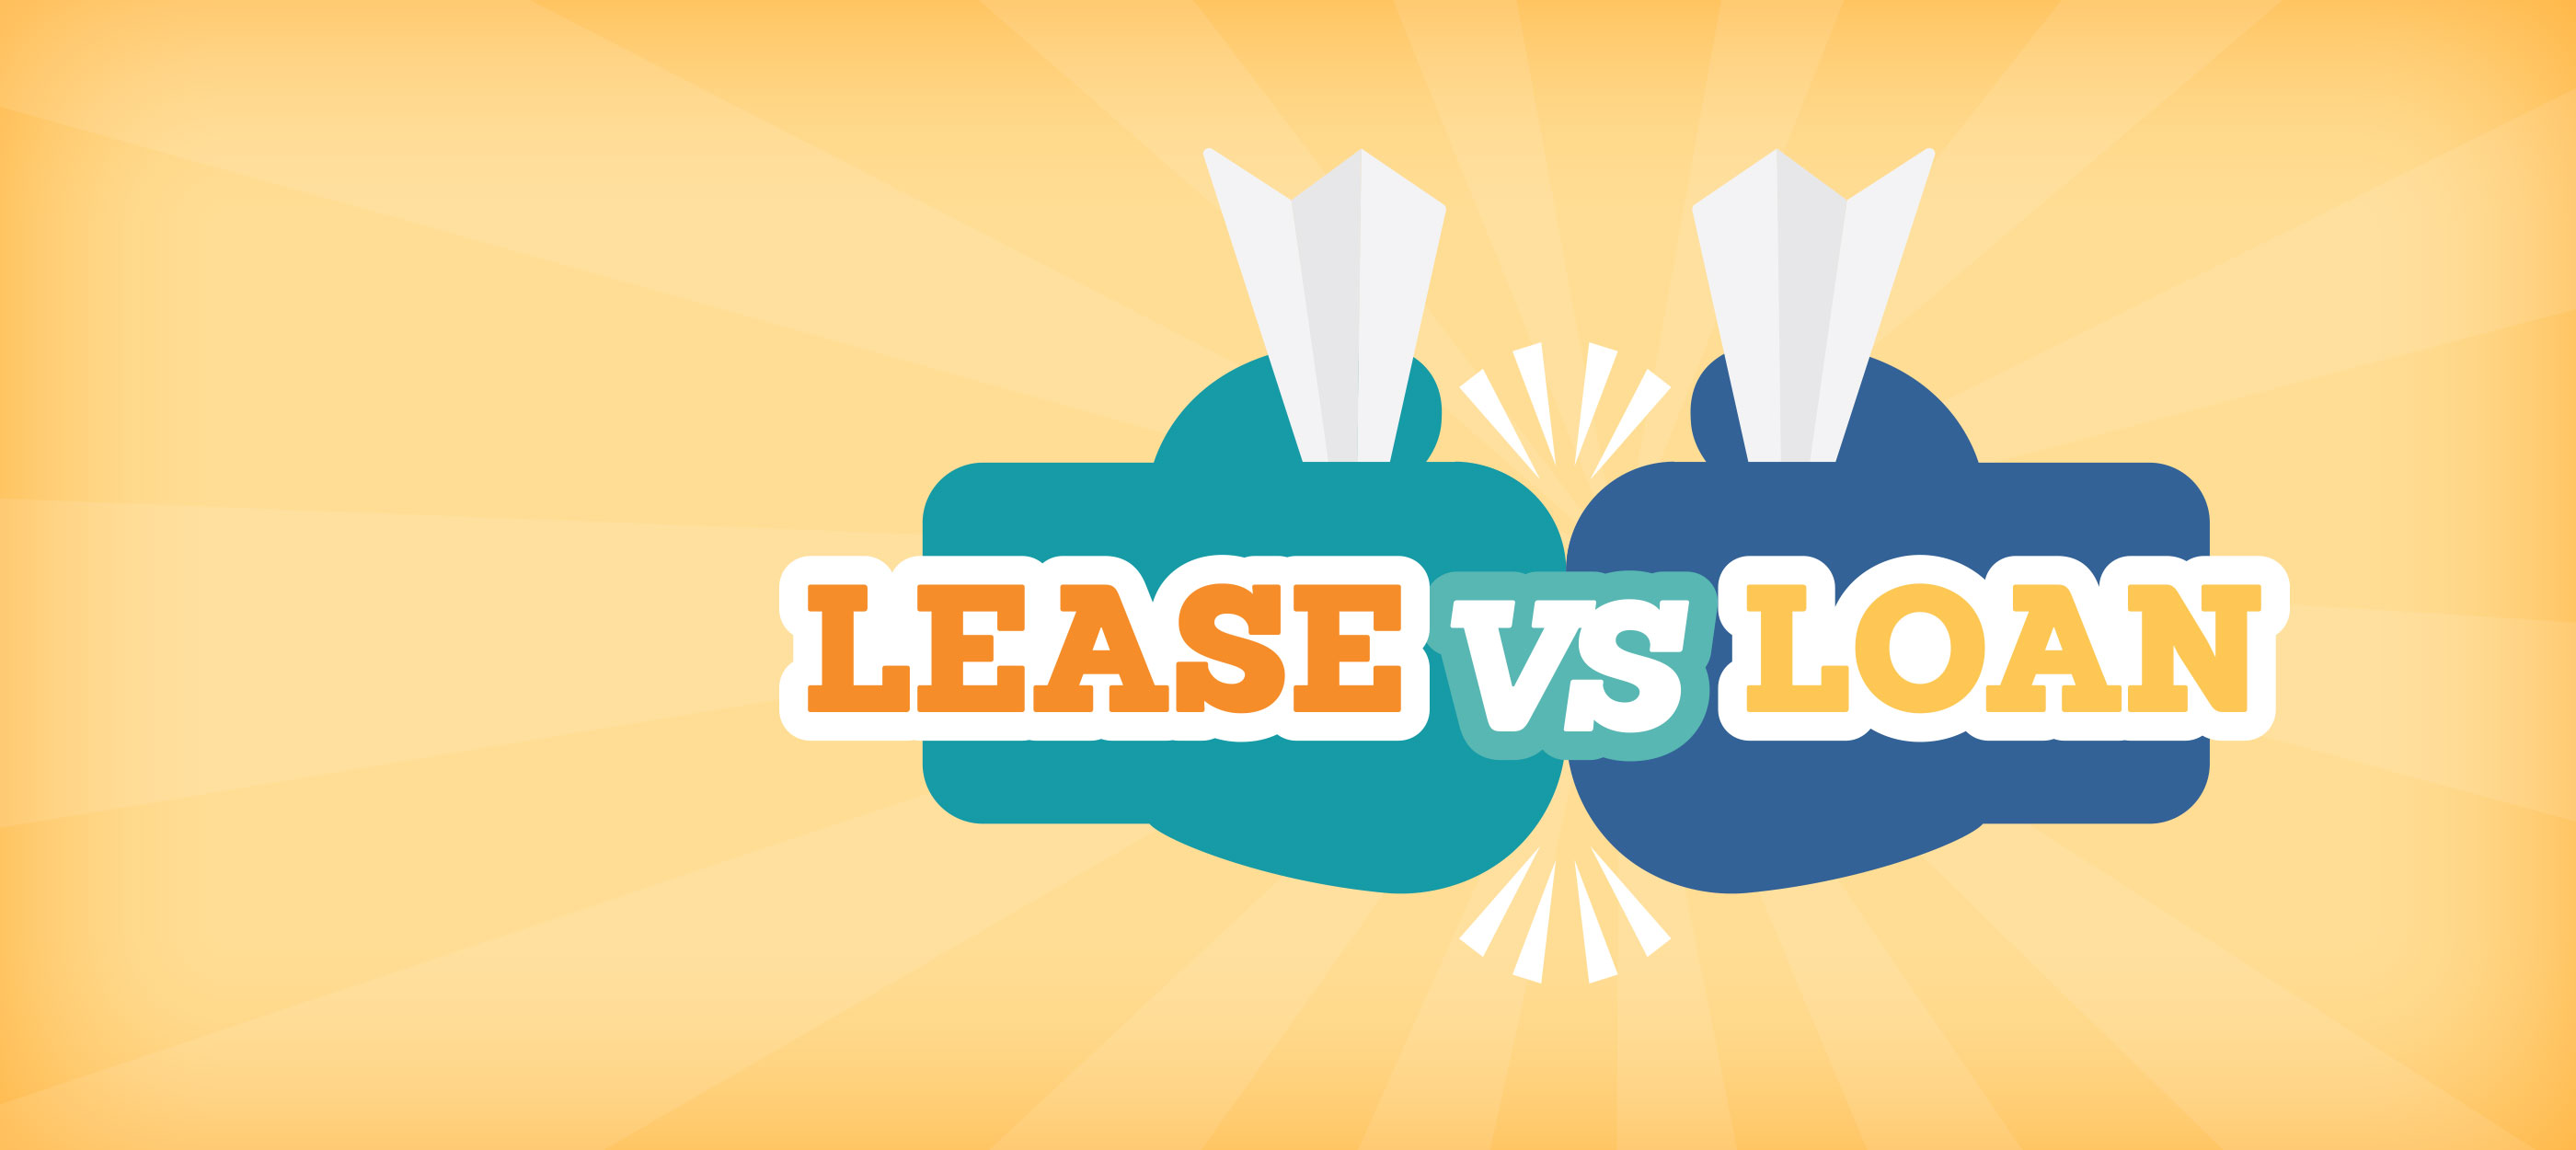 A lease and loan going head to head symbolized with boxing gloves